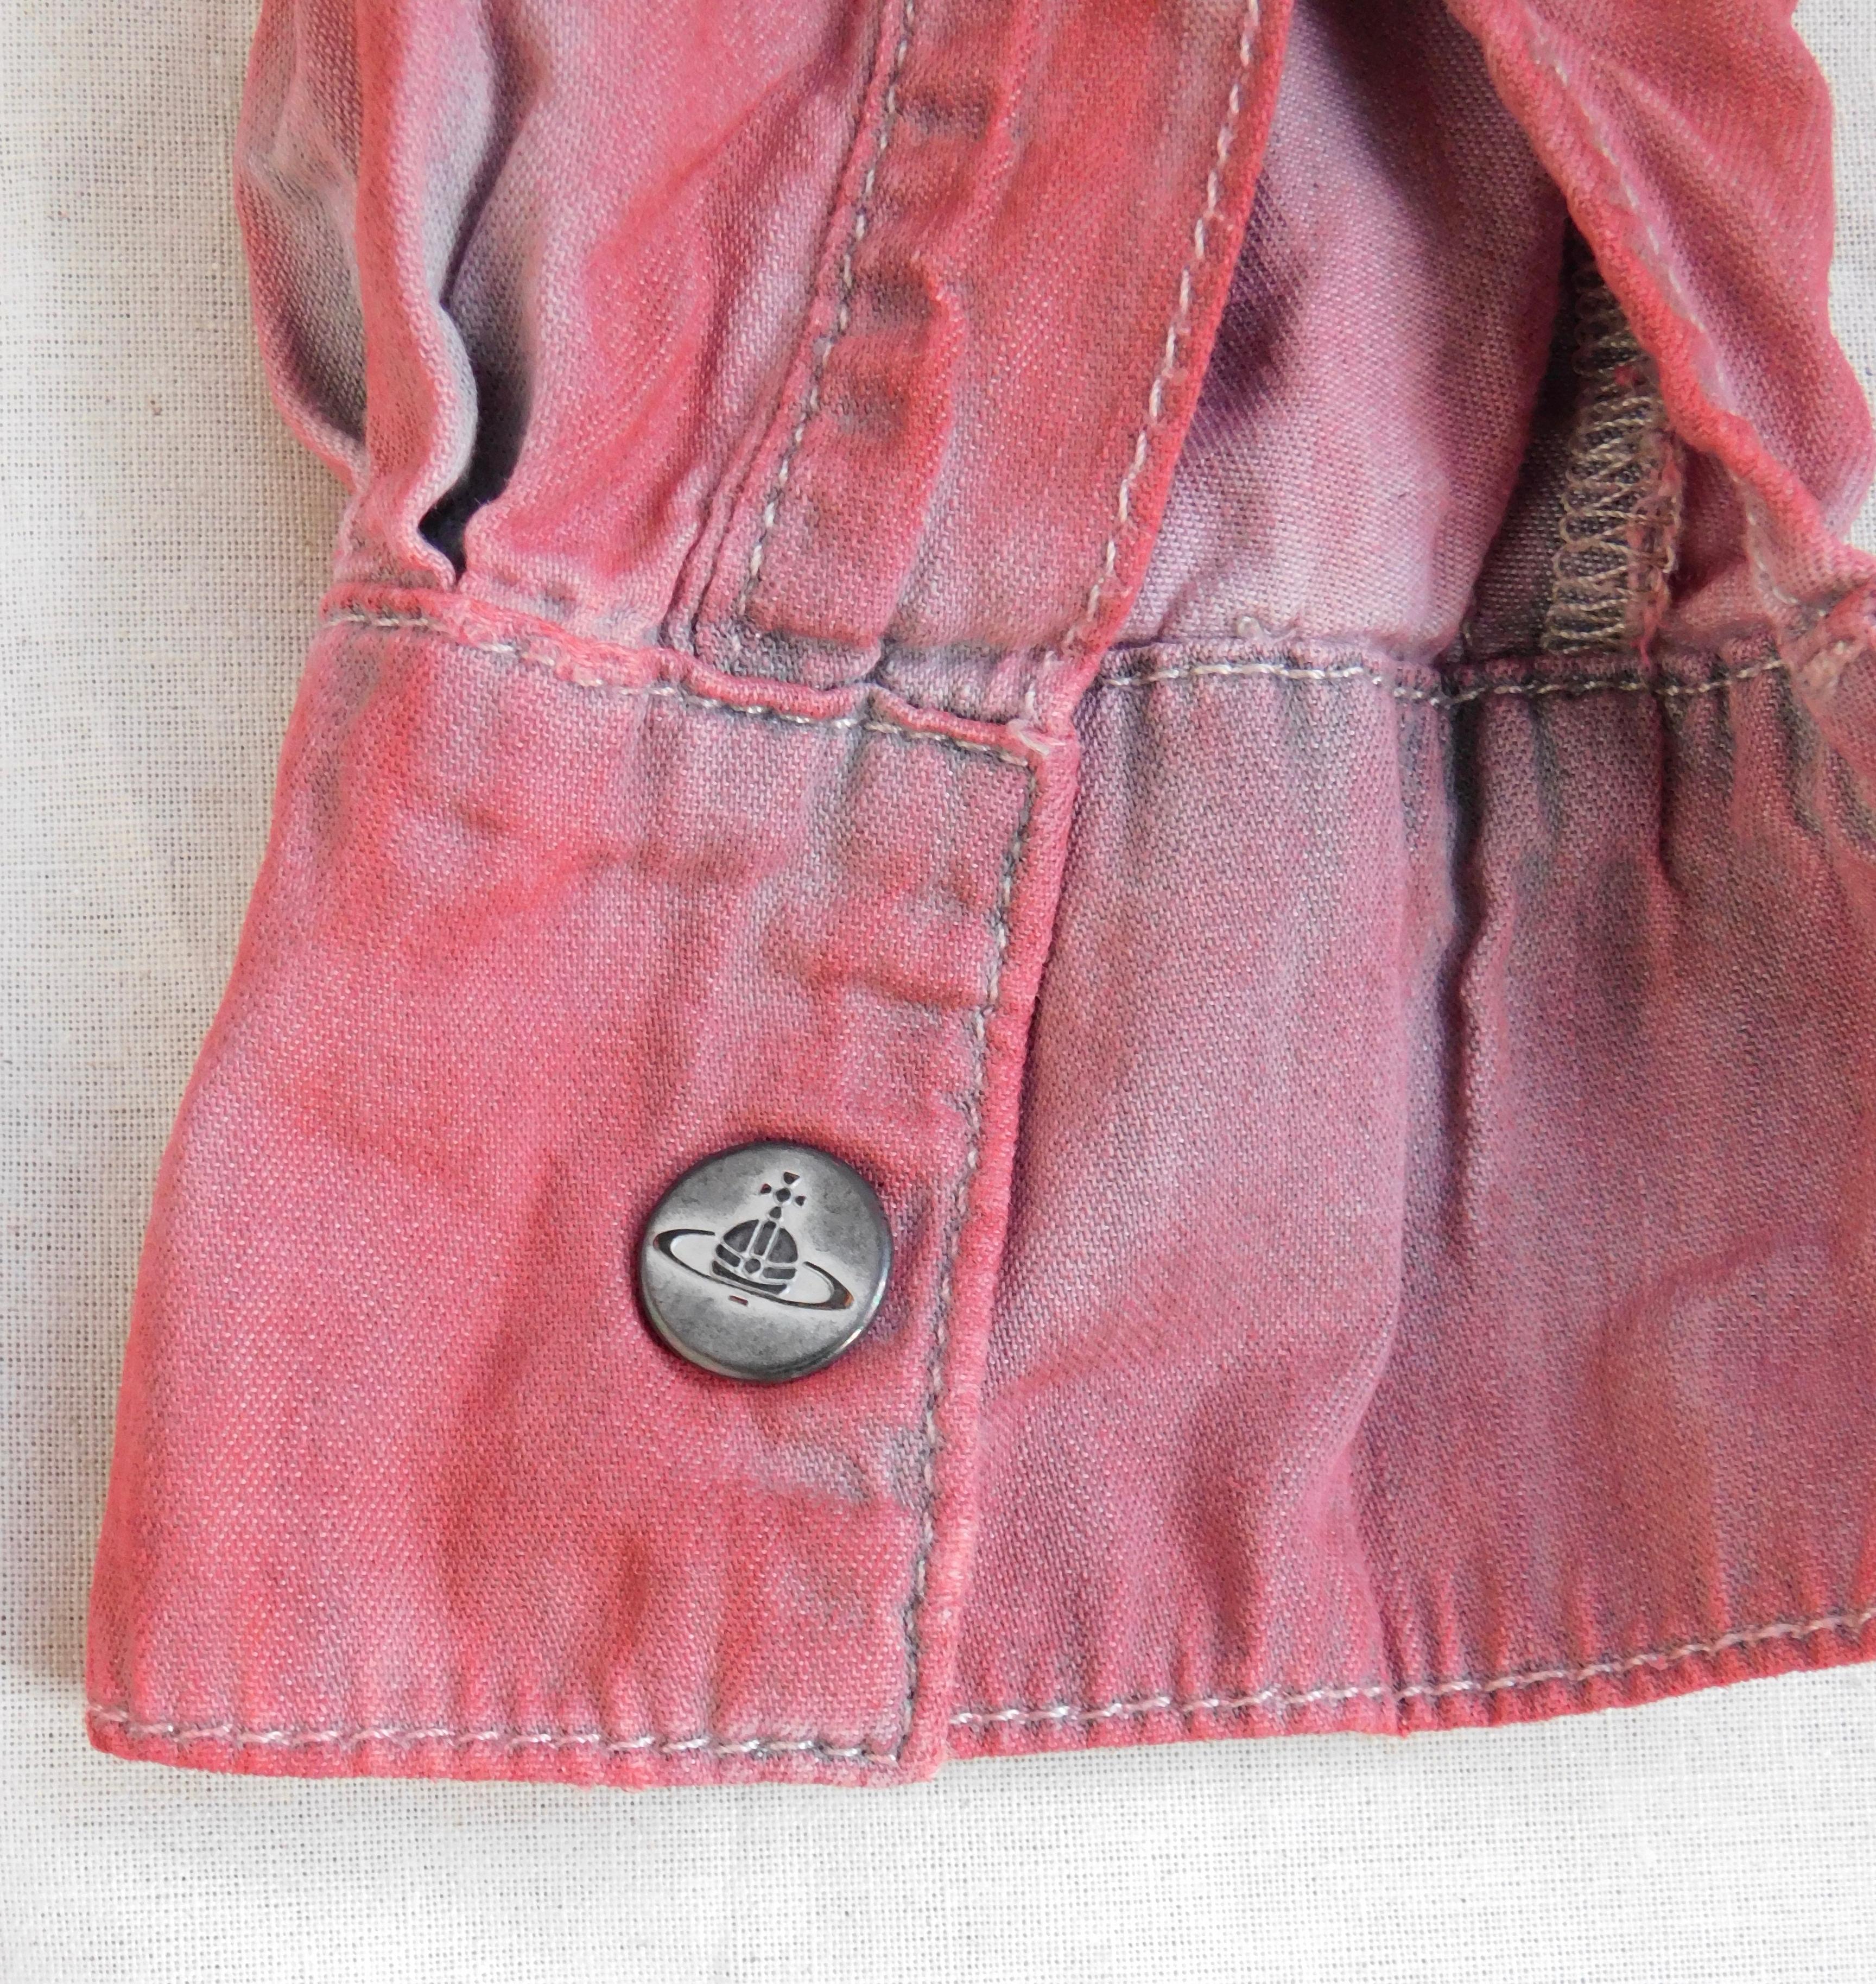 Jumpsuit shorts made by Vivienne Westwood Anglomania as a limited capsule collection for Lee Jeans. Soft grey cotton  over dyed in red creates a cool mottled vintage look. Never worn with the Original label .
Can be worn low on the hip or belted at